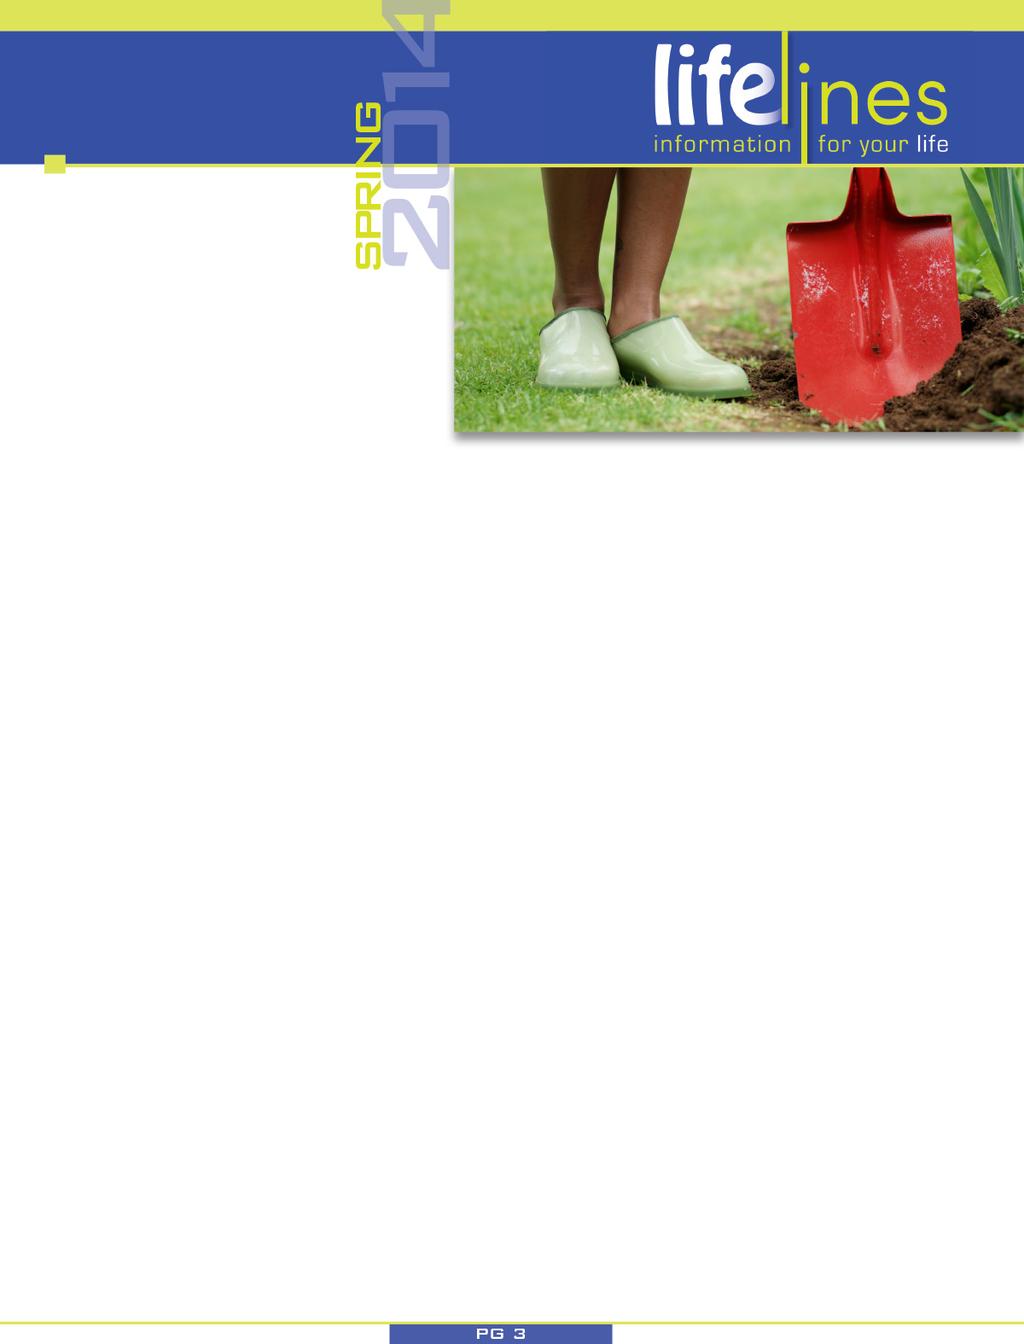 GARDENING HEALTH AND SAFETY TIPS continued from page 1 Lower your risk for sunburn and skin cancer.